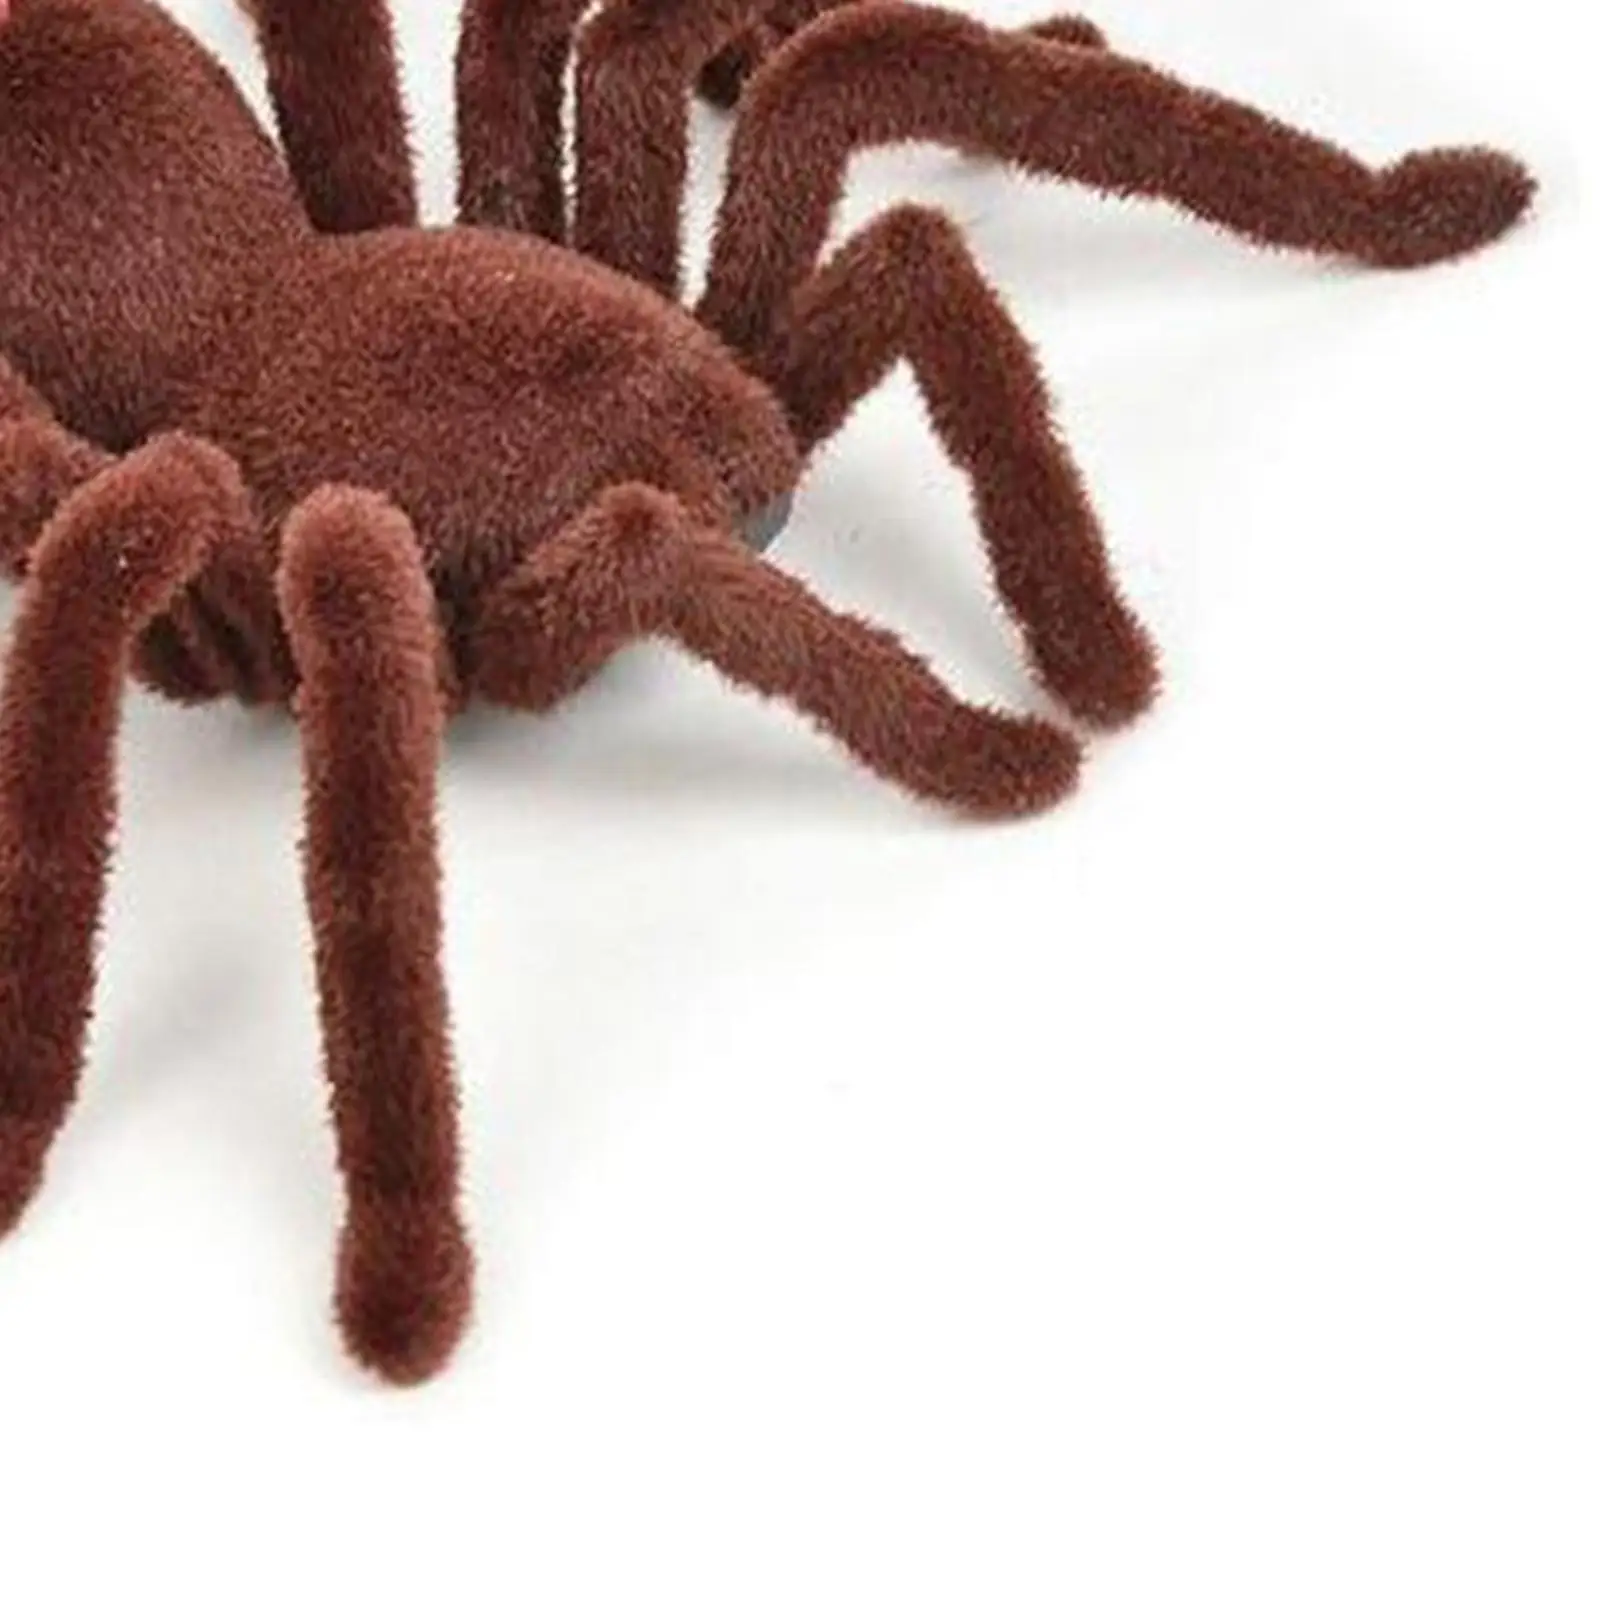 

Remote Control Scary Creepy Soft Plush Spider Infrared RC Gift